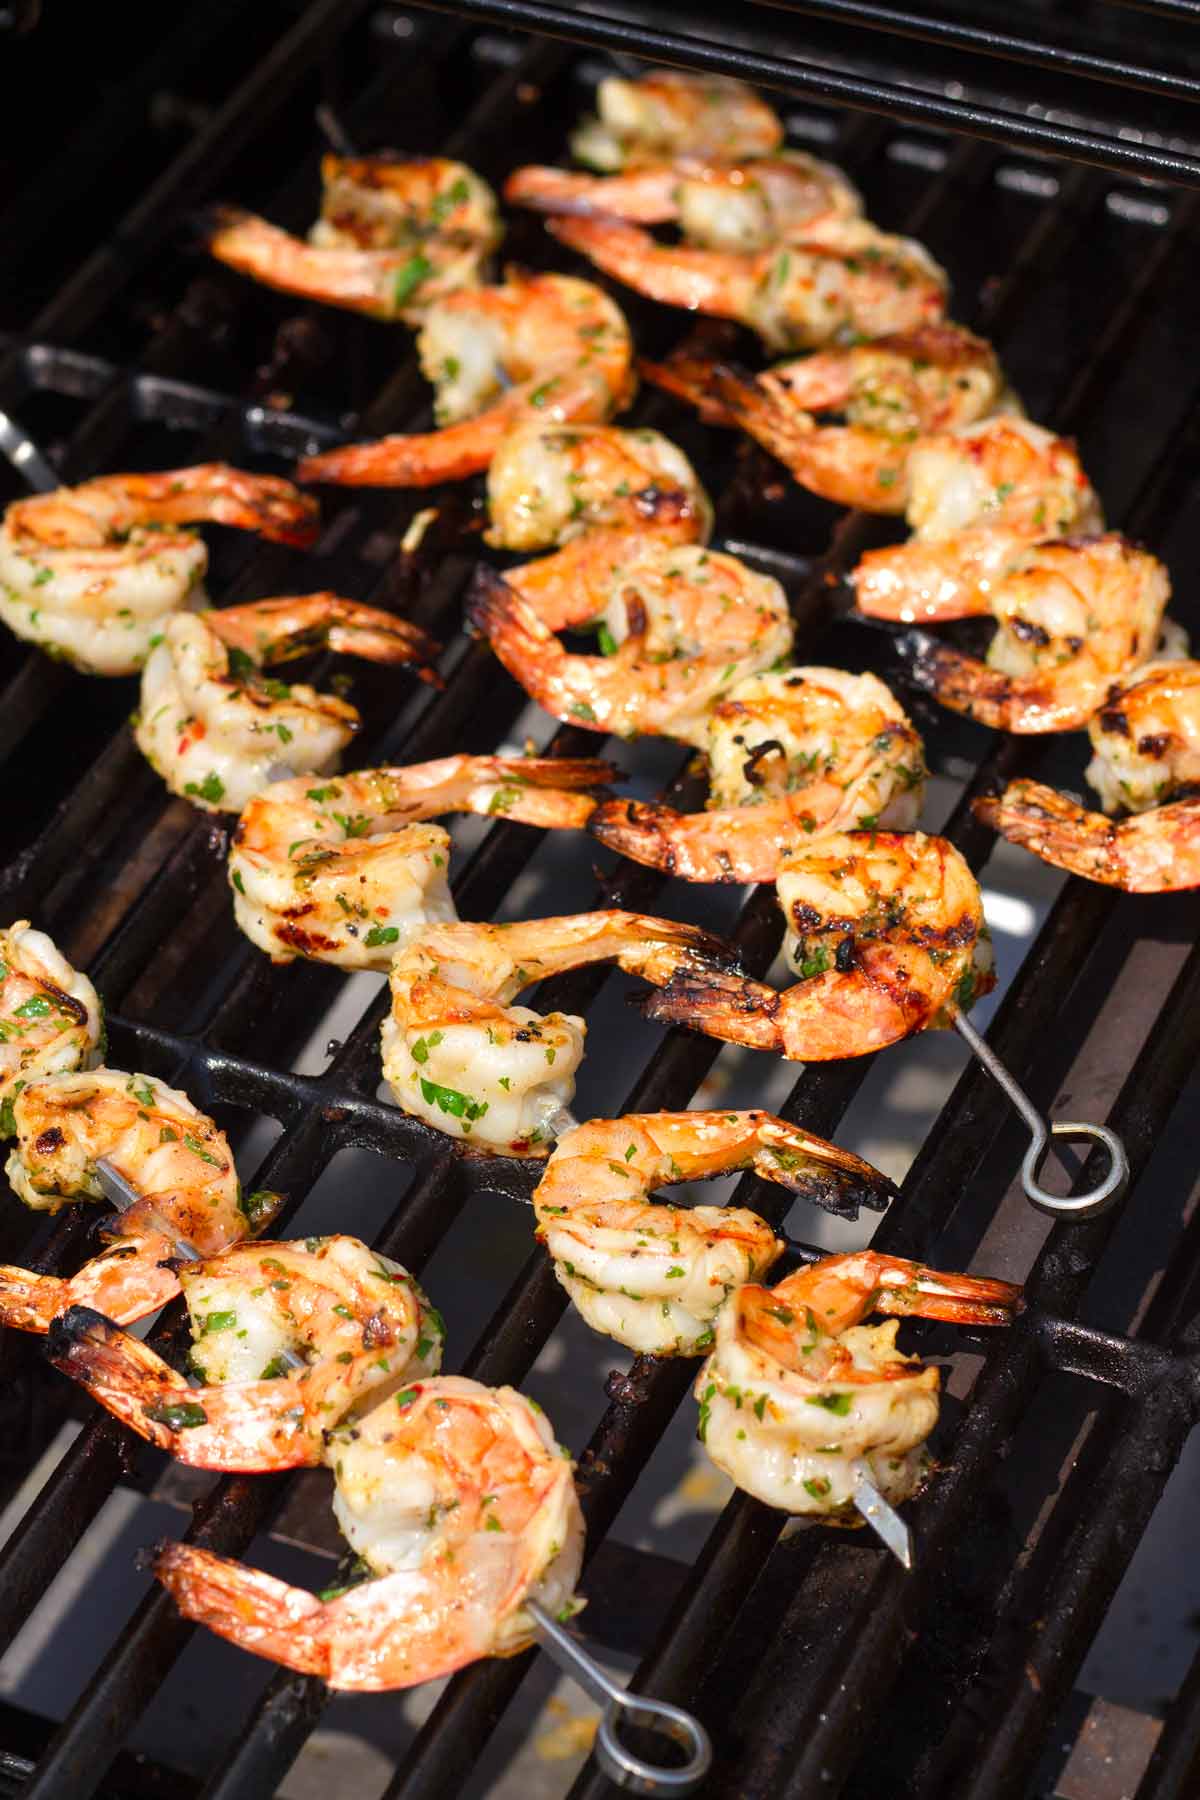 four shrimp skewers on outdoor grill